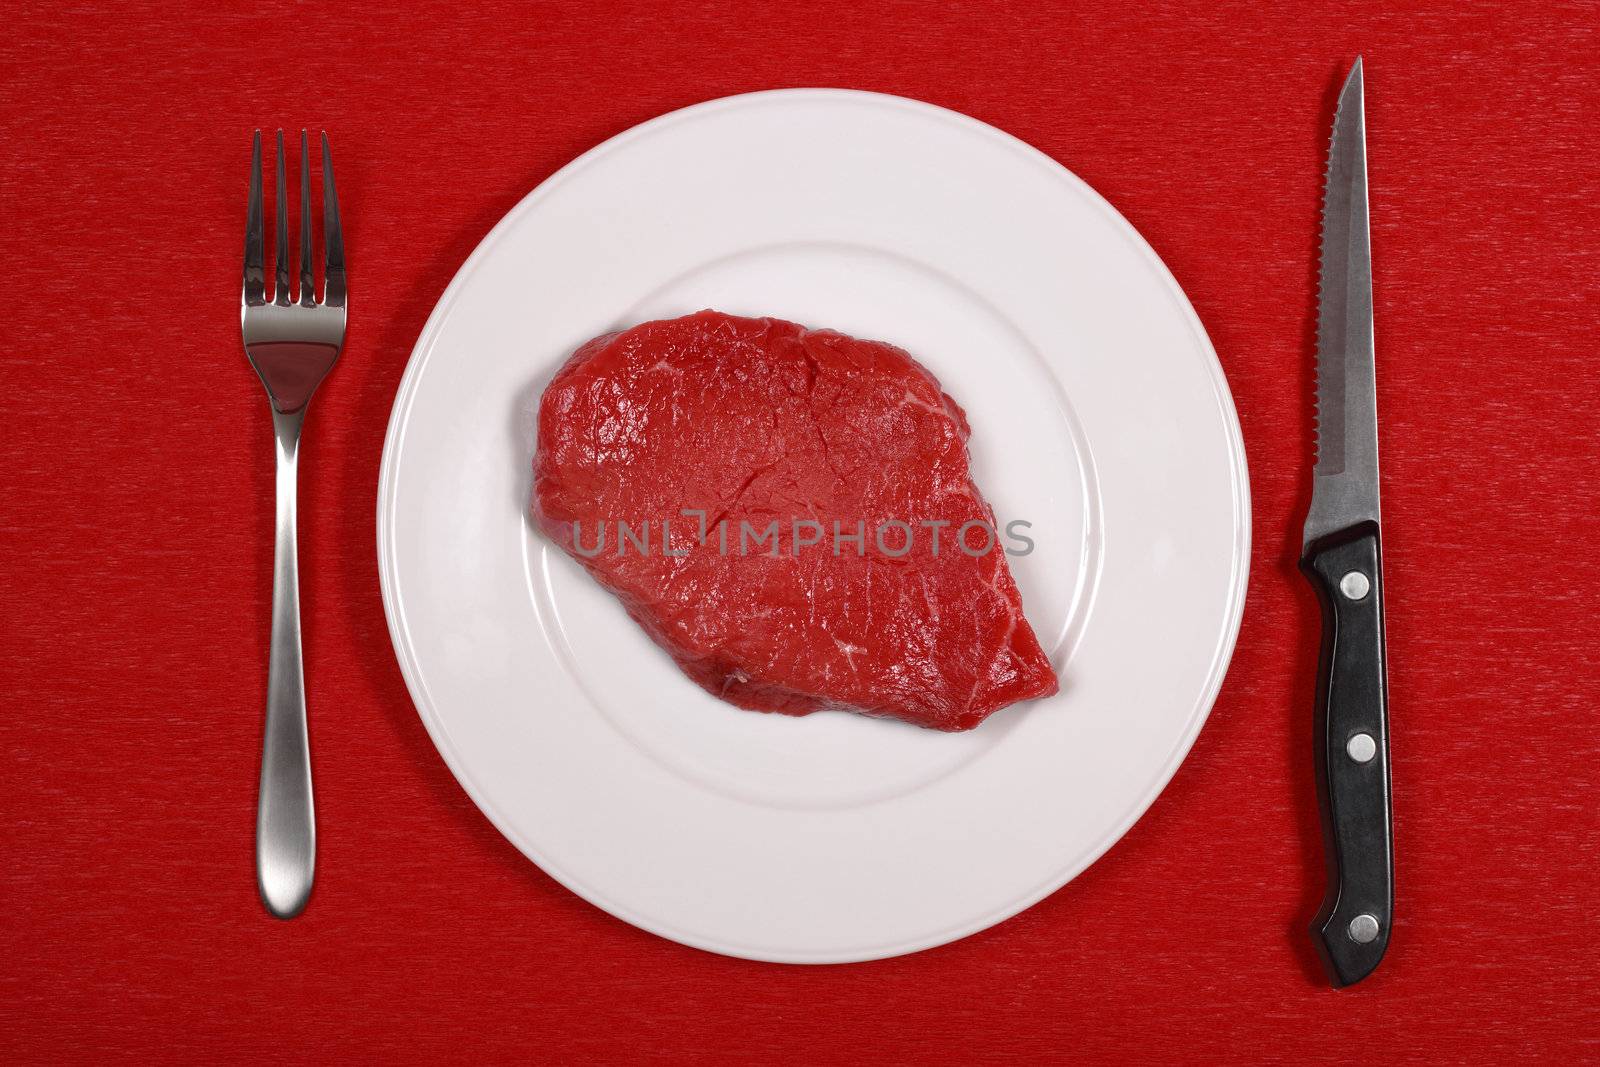 Raw meat on a dinner plate with knife and fork.
